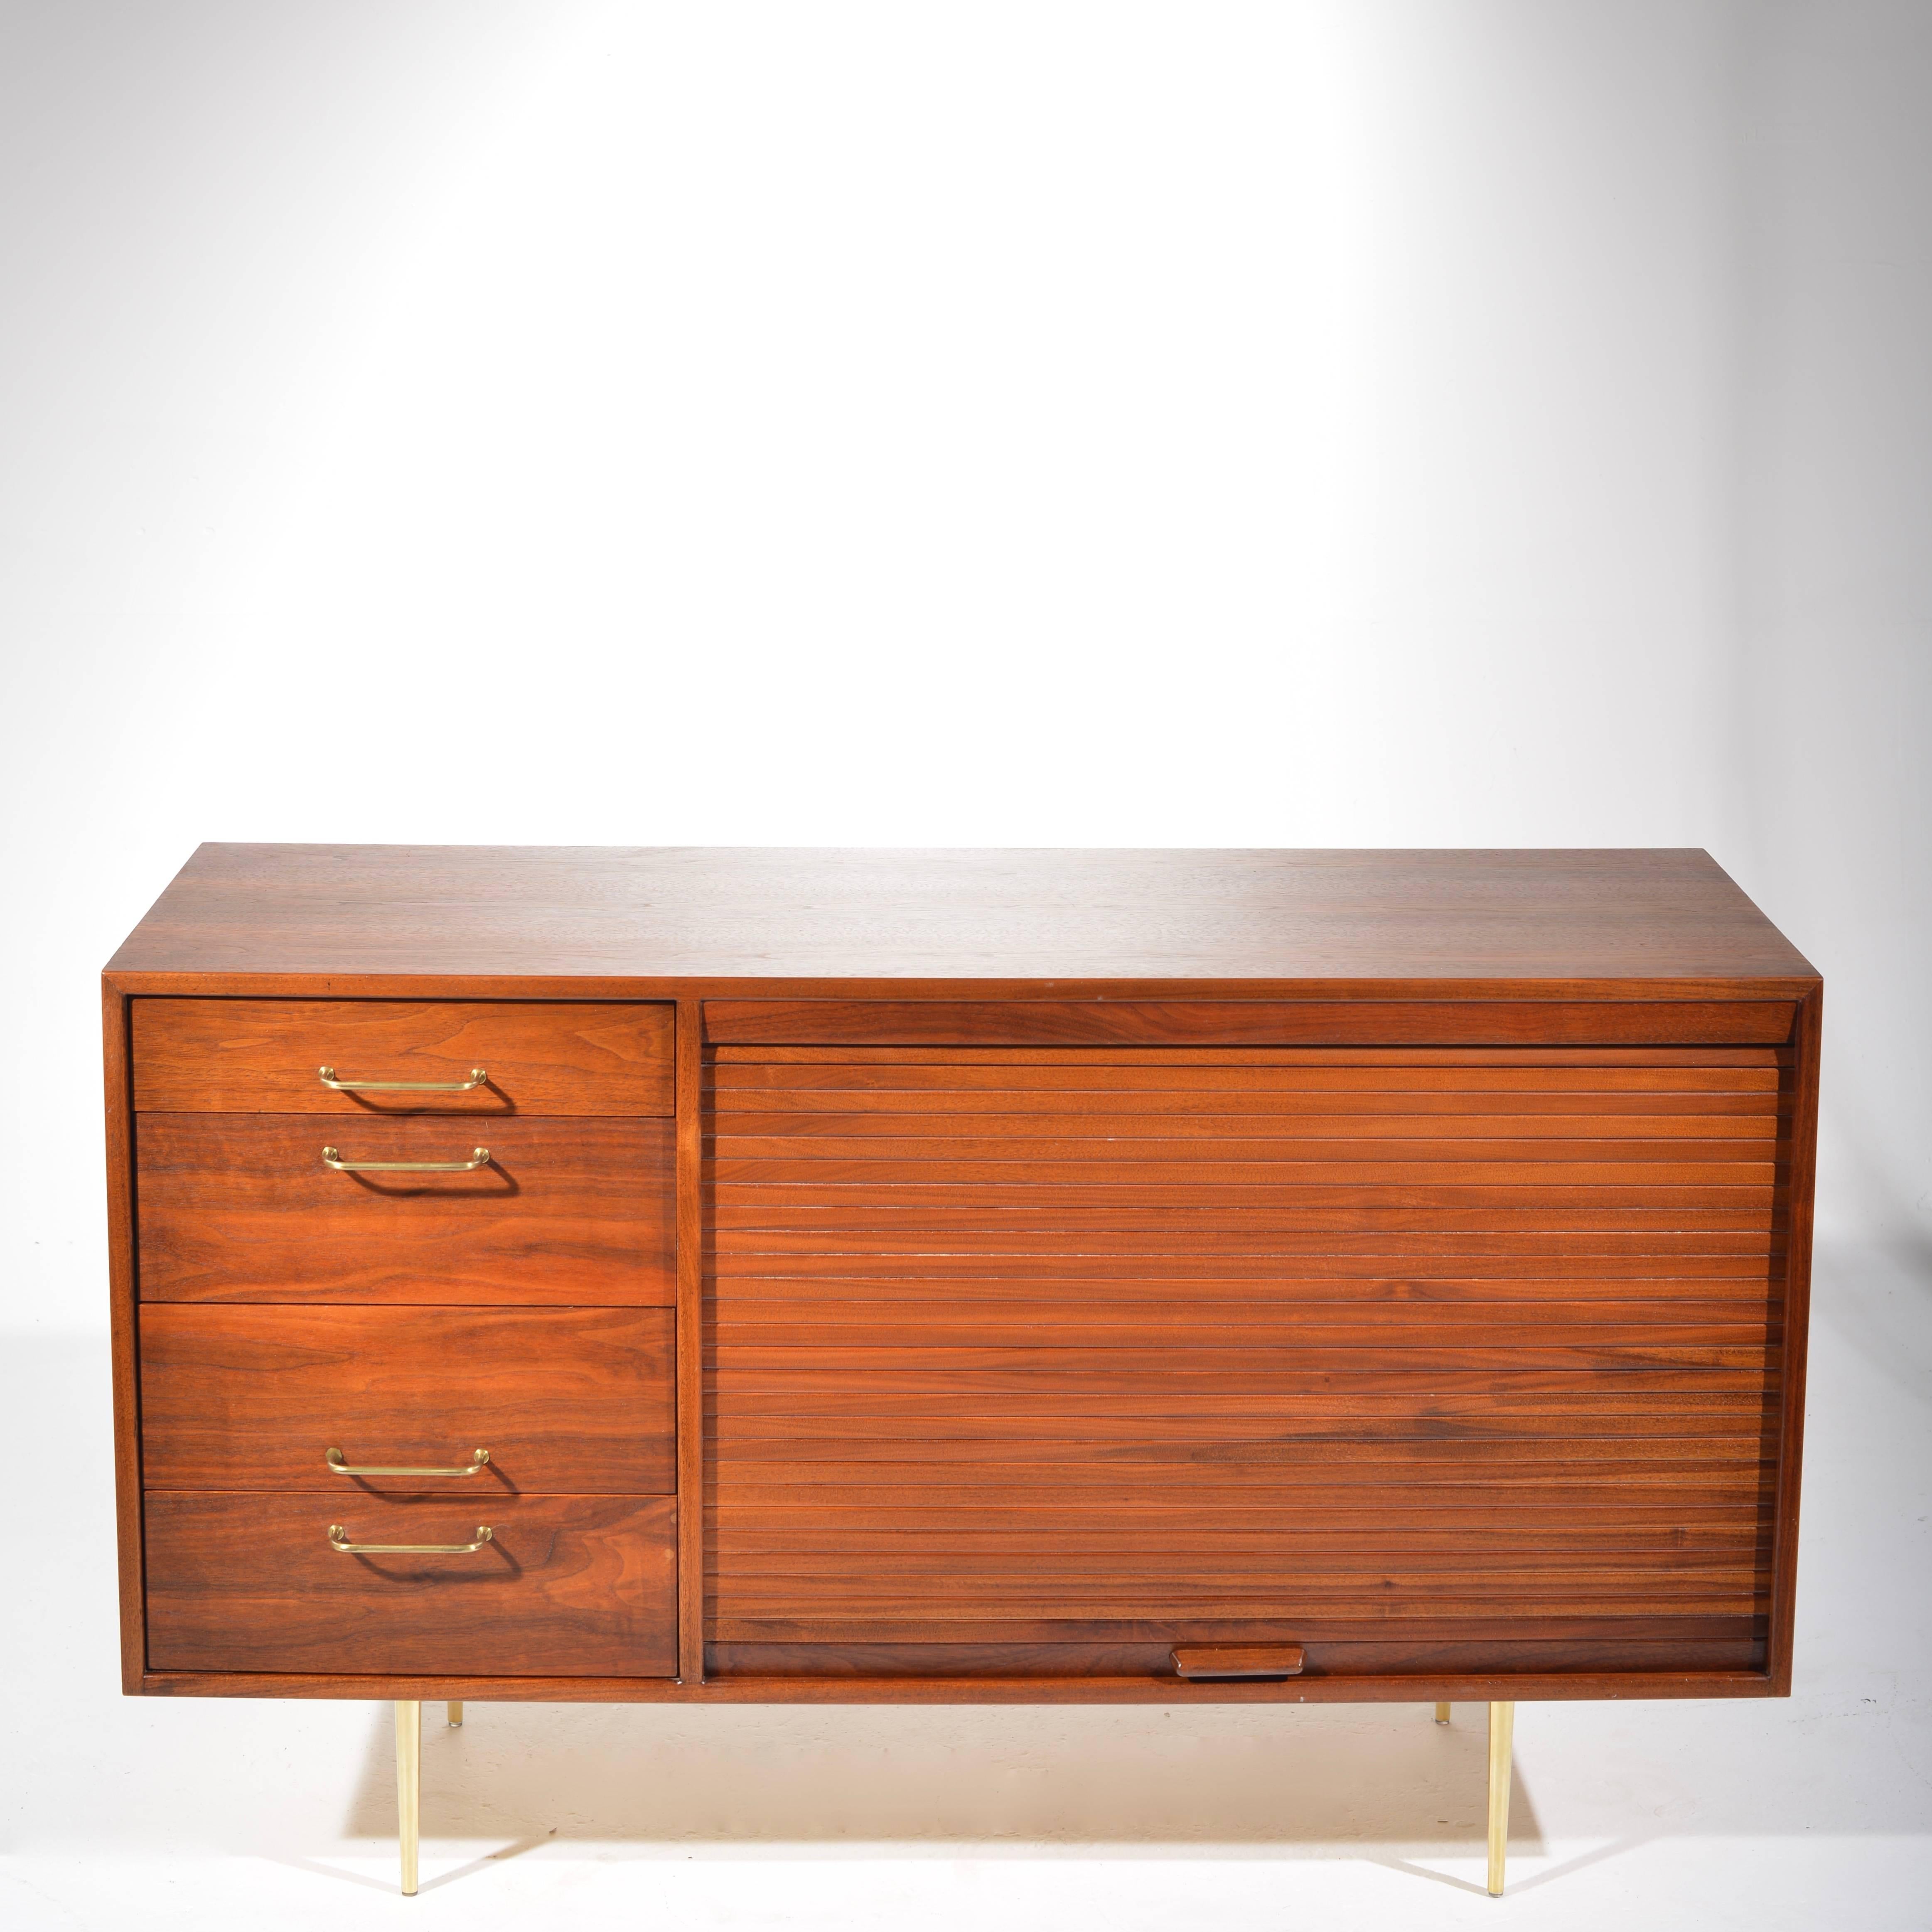 A beautiful walnut credenza buffet designed by Jens Risom, circa 1960. It features the highest quality in materials and cabinetry, solid maple interiors and drawers, and an large adjustable shelf. Everything operates smoothly. 

Local pick up is